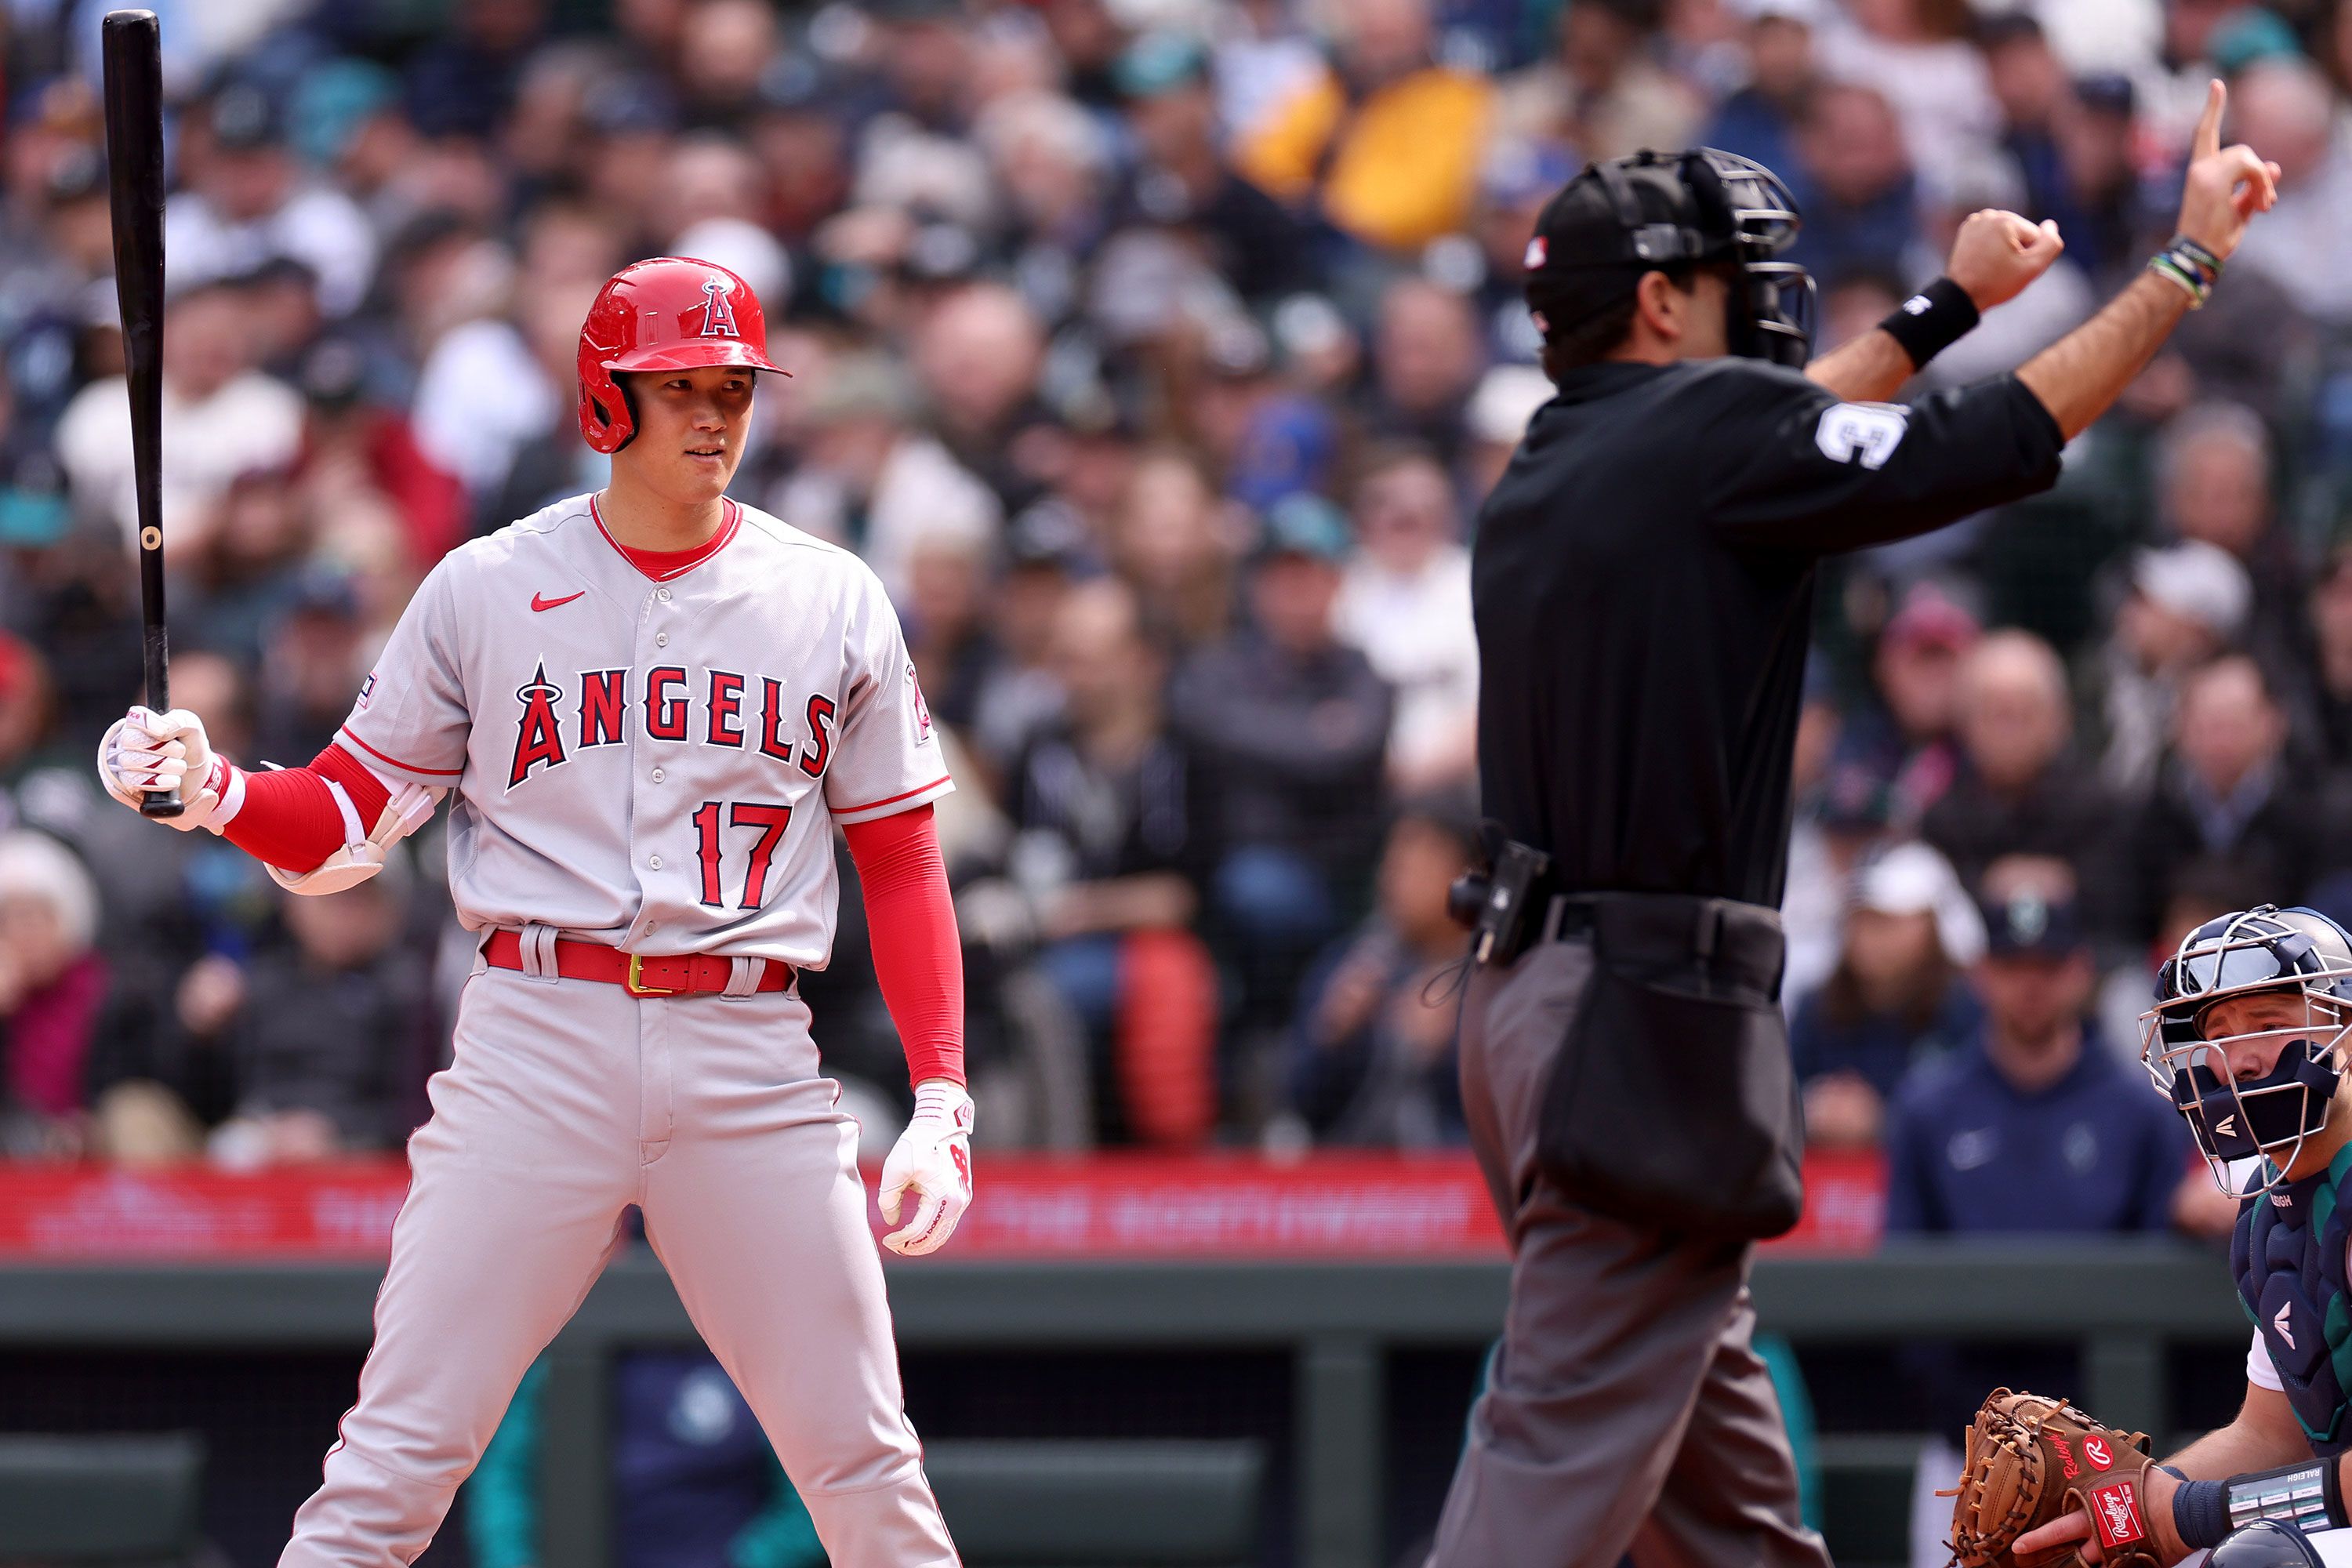 Shohei Ohtani gets two hits in Angels' spring training home opener